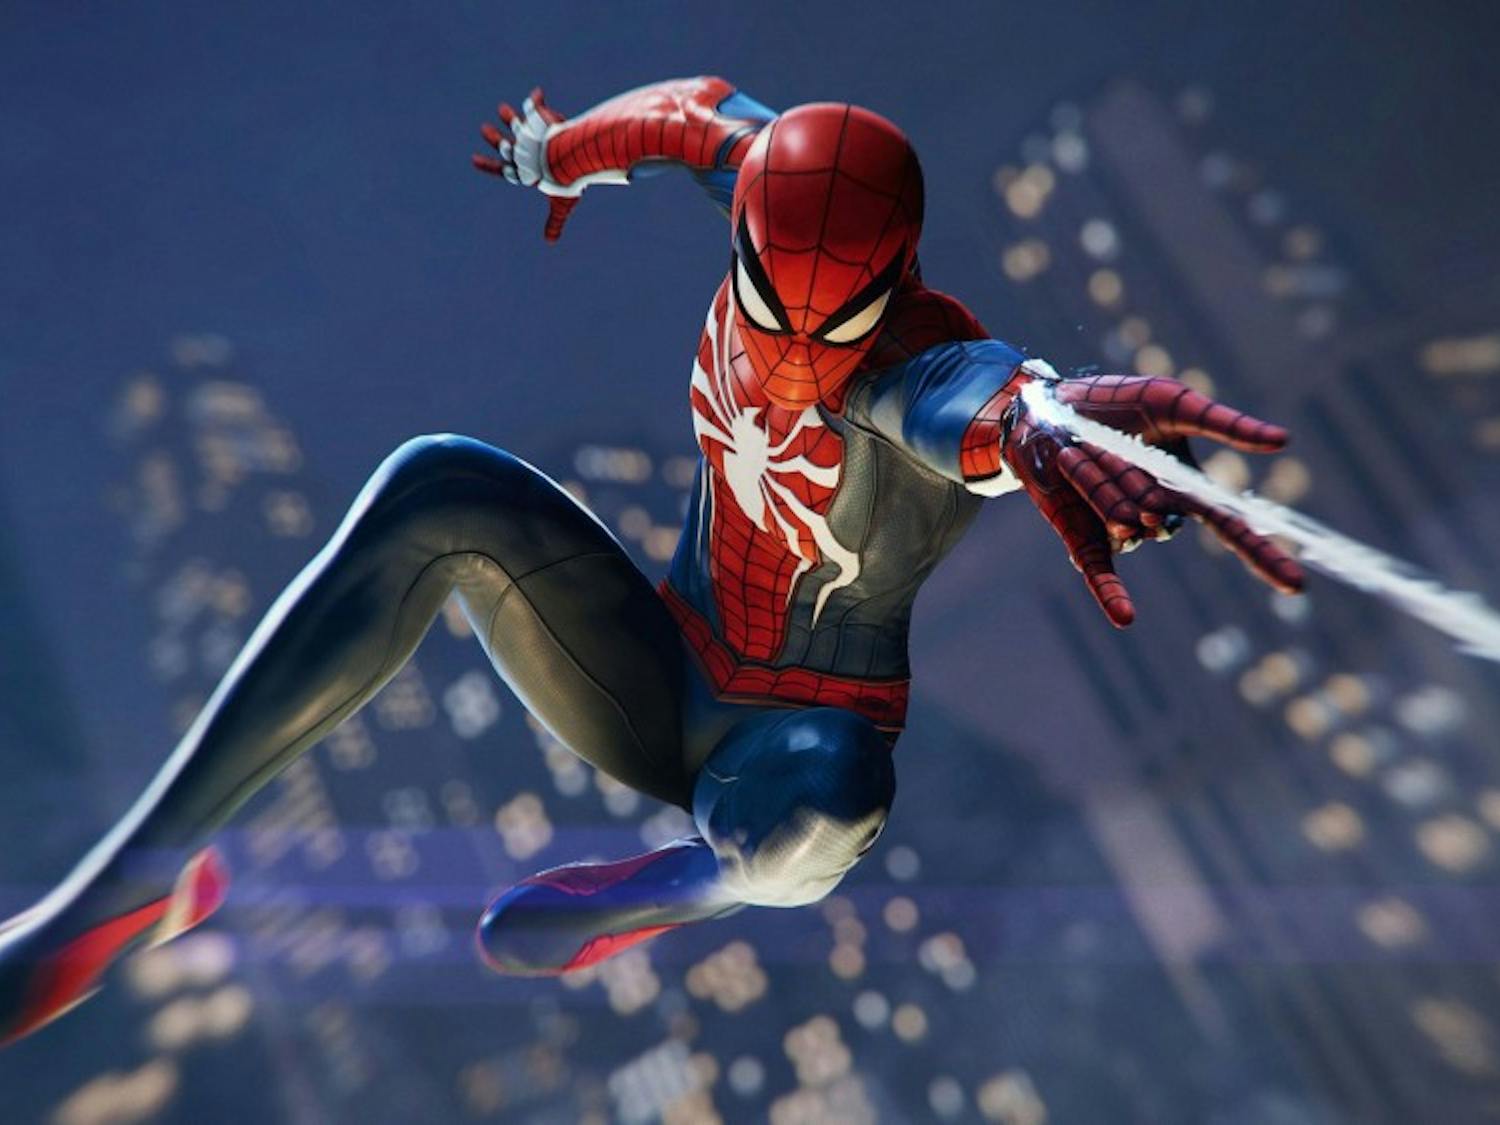 “Spider-Man” for PS4 comes out the gate in the midst of the superhero craze, and it makes for an incredible experience.